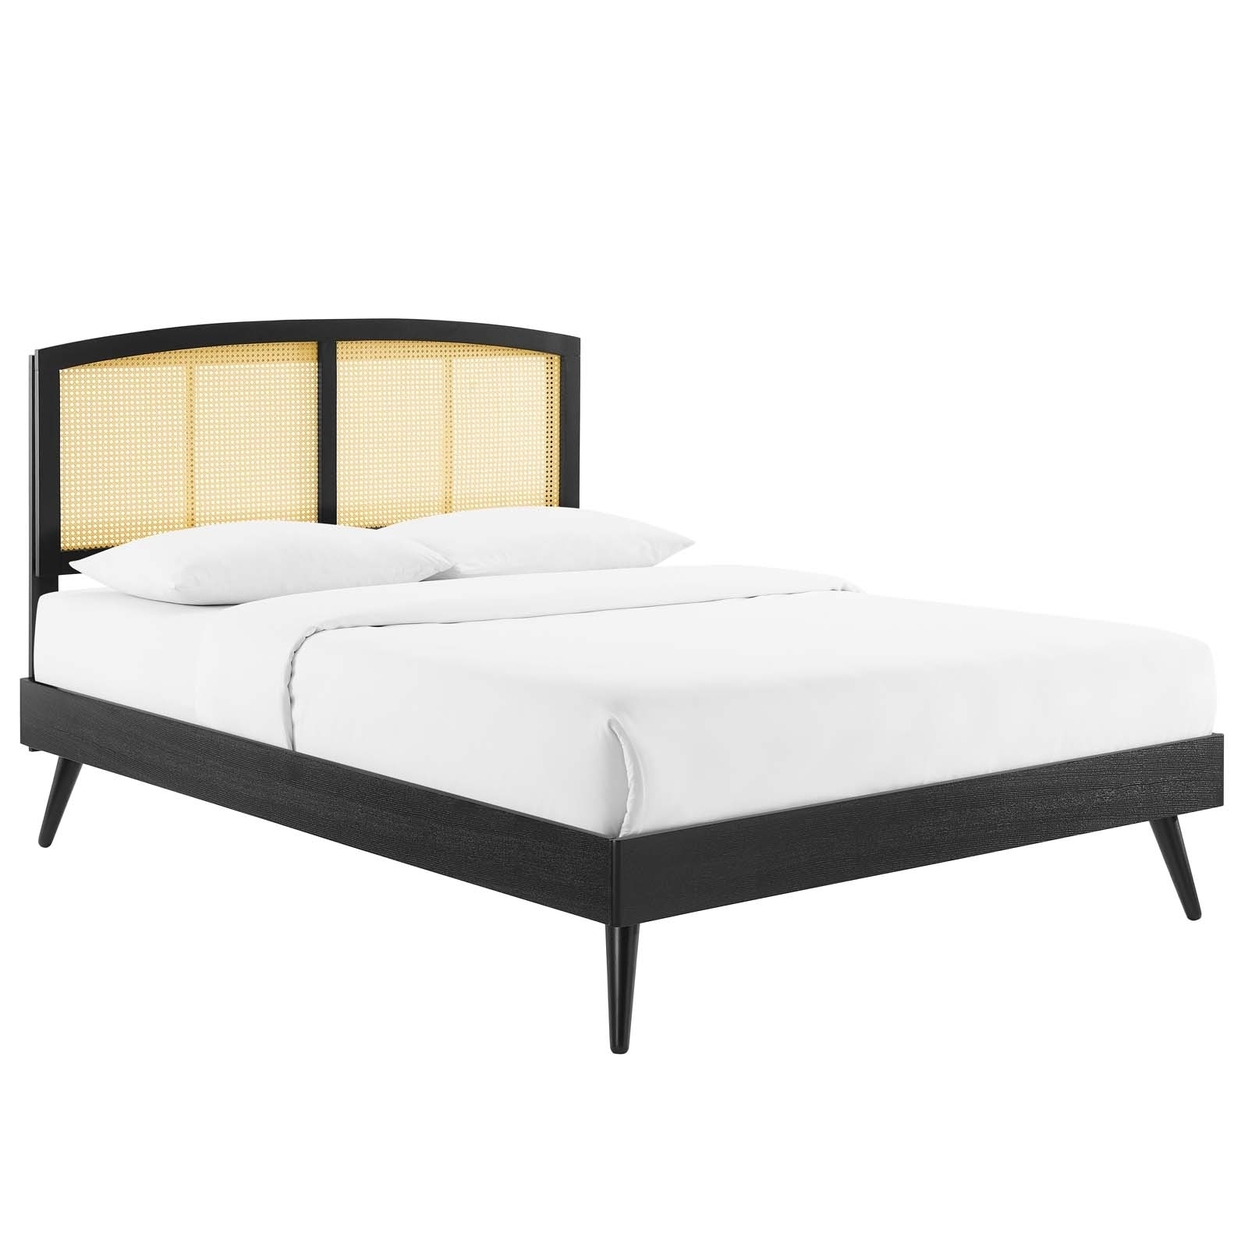 Sierra Cane And Wood King Platform Bed With Splayed Legs, Black